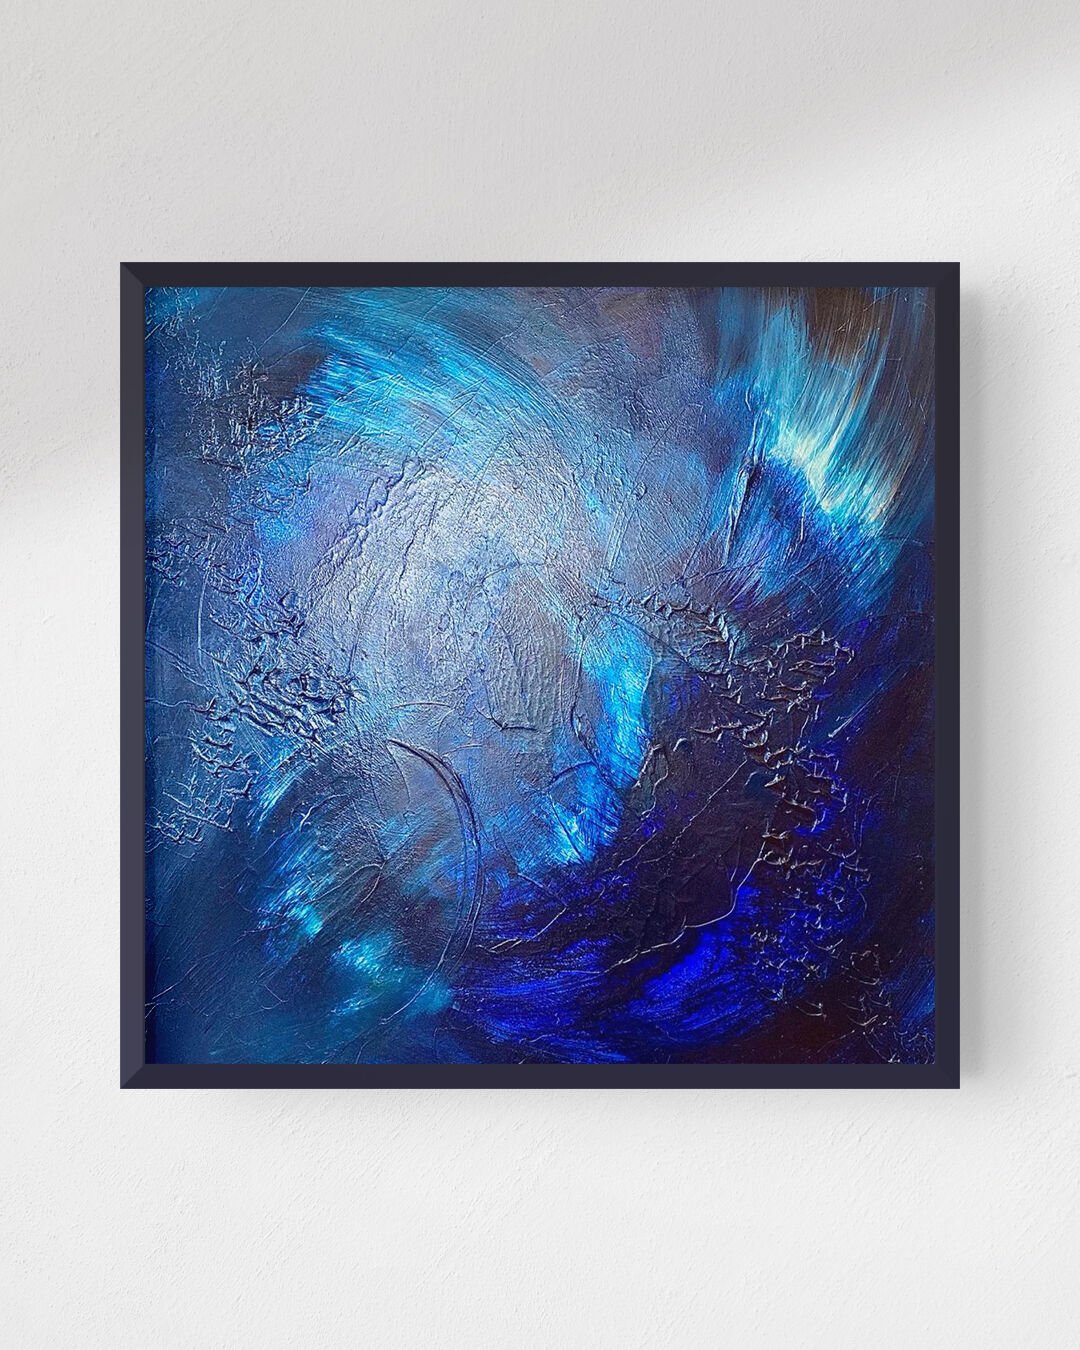 Pure Collection - 91 x 91cm
💙
Abstract art at its purist - using confident yet calming blues.
.
My work is best seen in person - DM to arrange a viewing at my #altrincham studio. The original painting and limited edition art prints are available. 
.